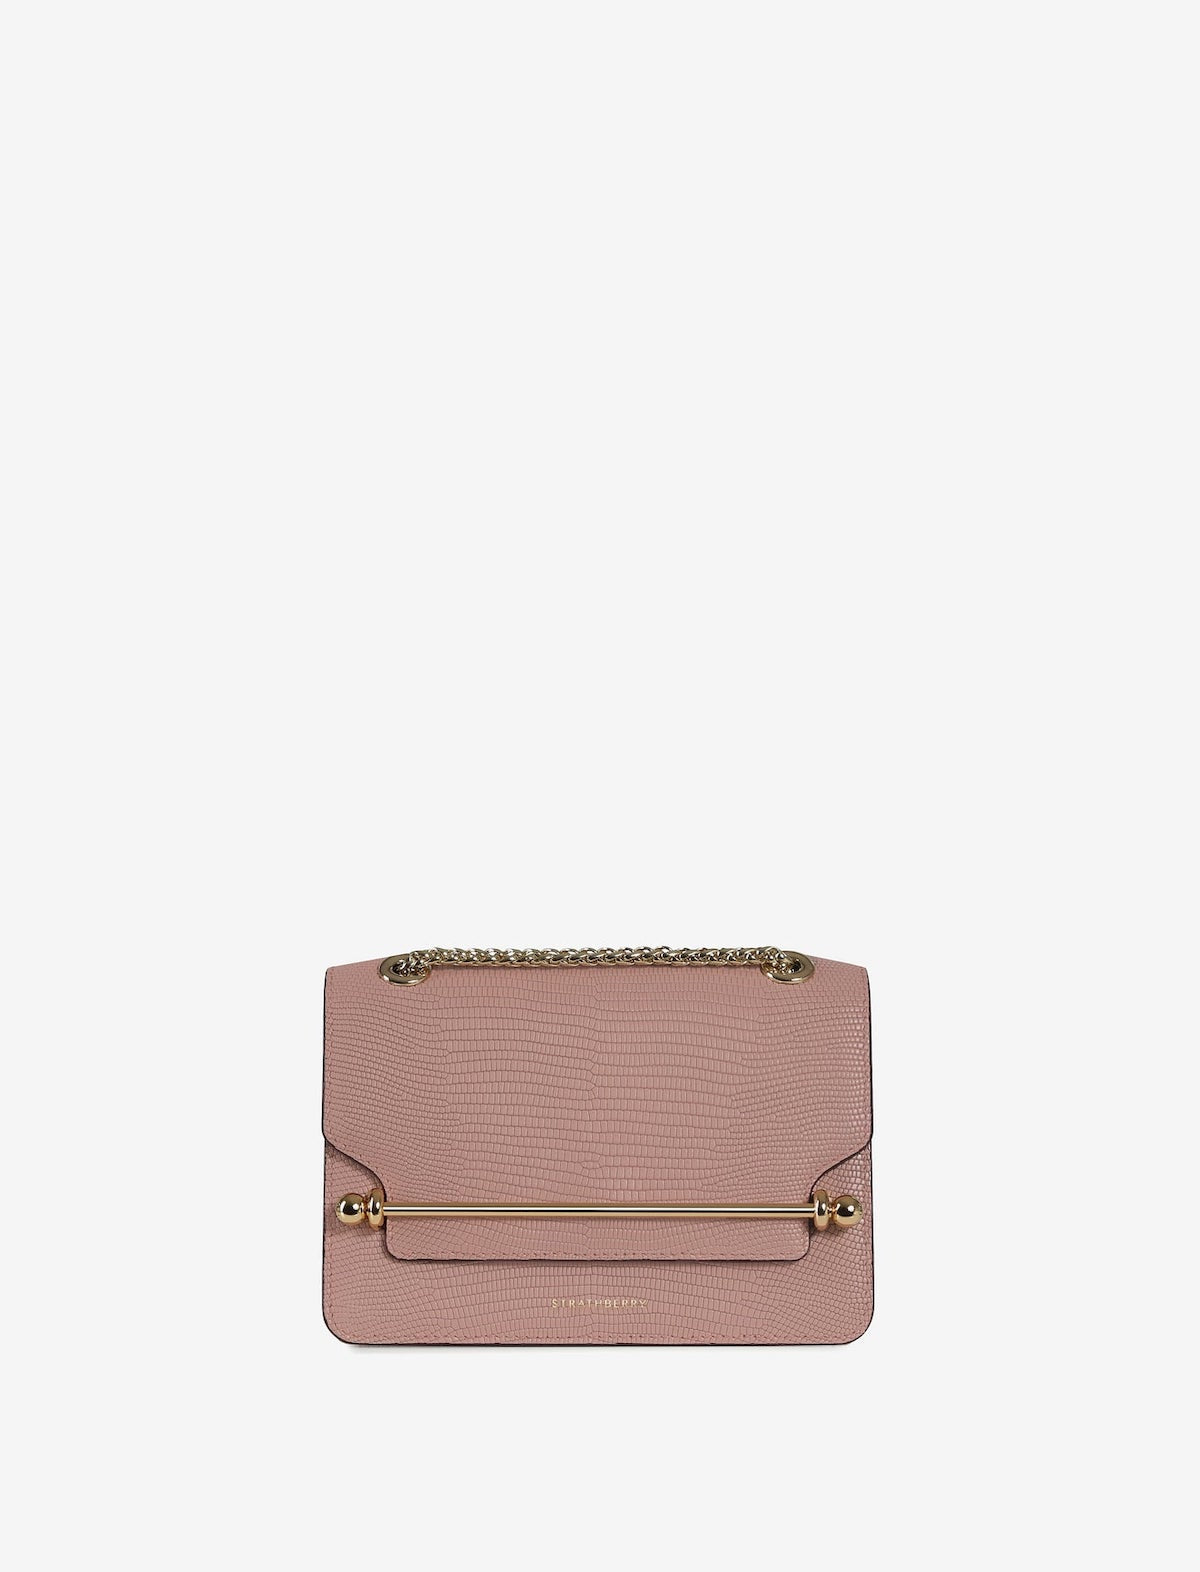 STRATHBERRY East/West Mini Bag in Embossed Blush Rose